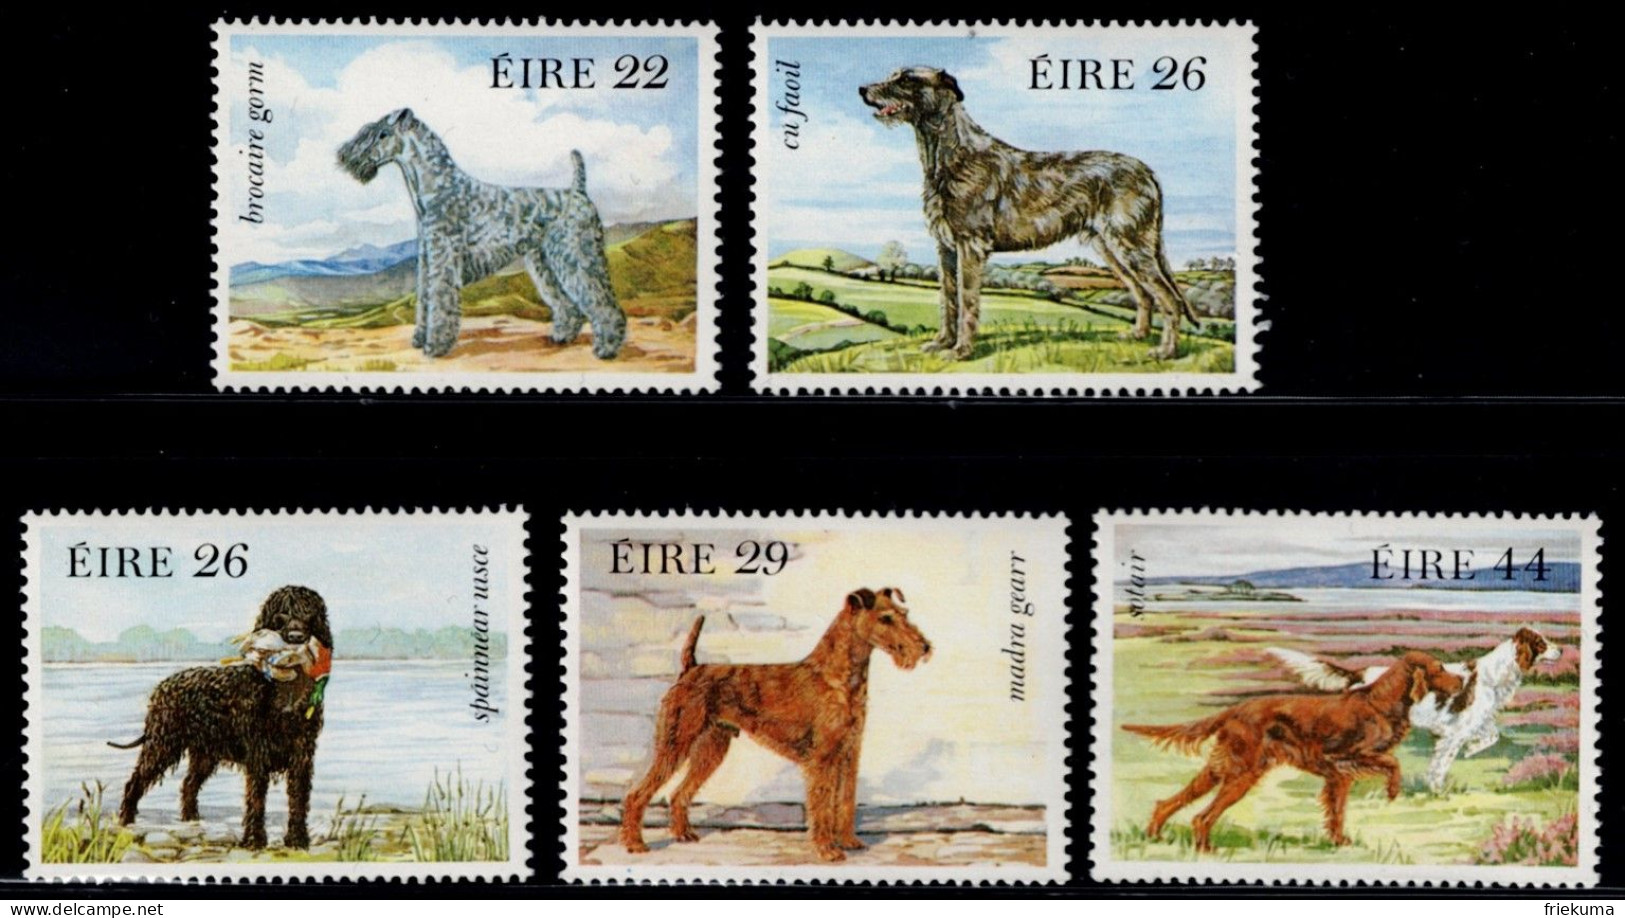 Éire 1983, Dogs: Kerry Blue Terrier, Irish Wolfhound, Irish Water Spaniel, Irish Terrier, Irish Setter, MiNr. 510-514 - Cani